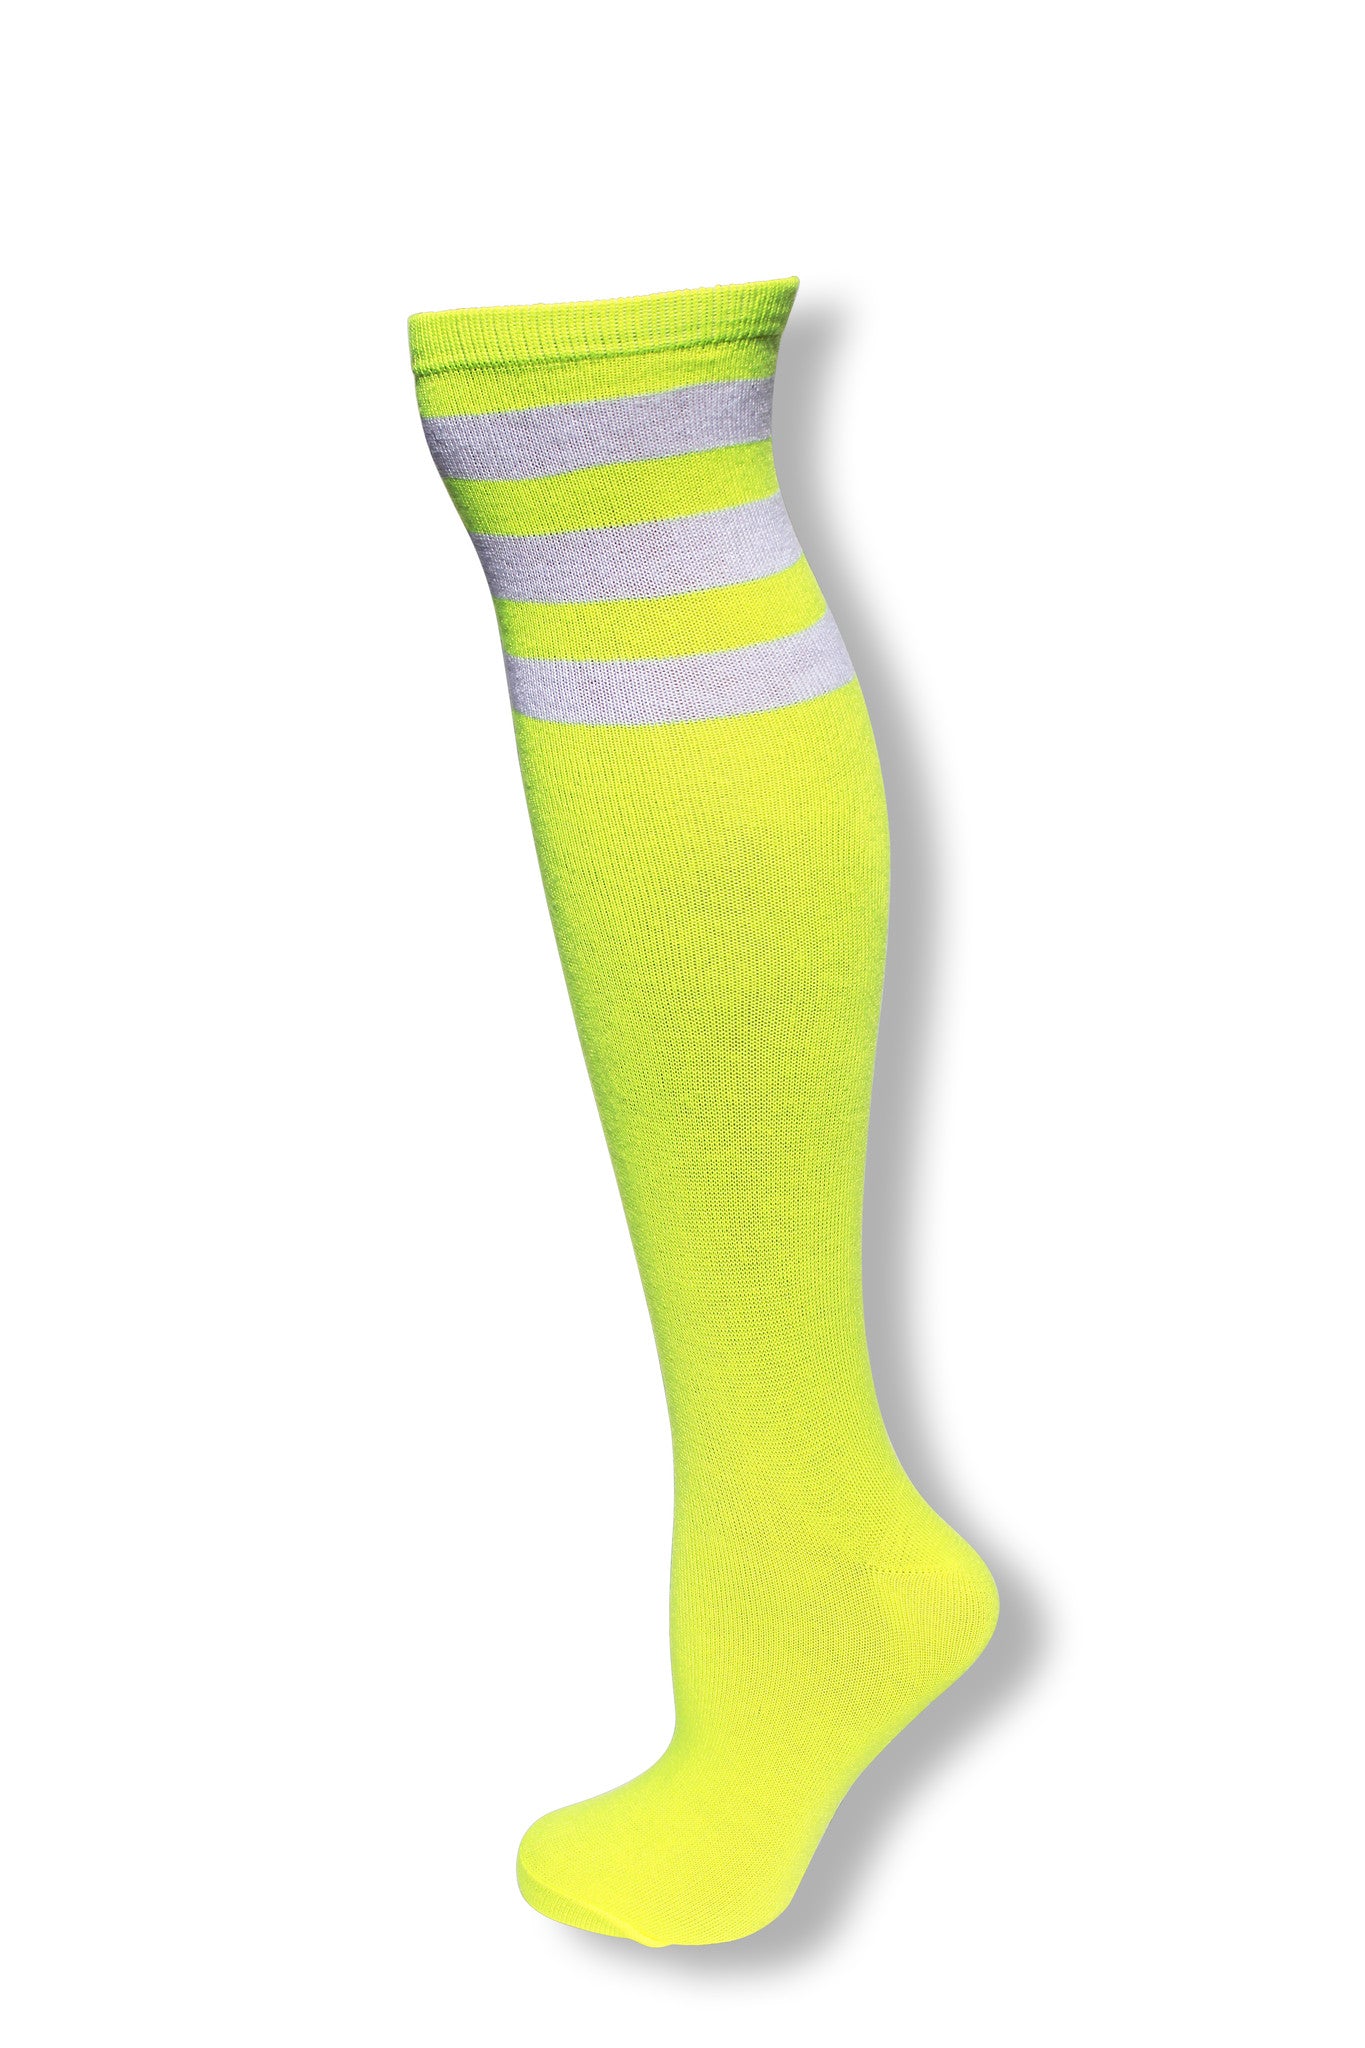 Neon Yellow with White Stripes Knee High Sock